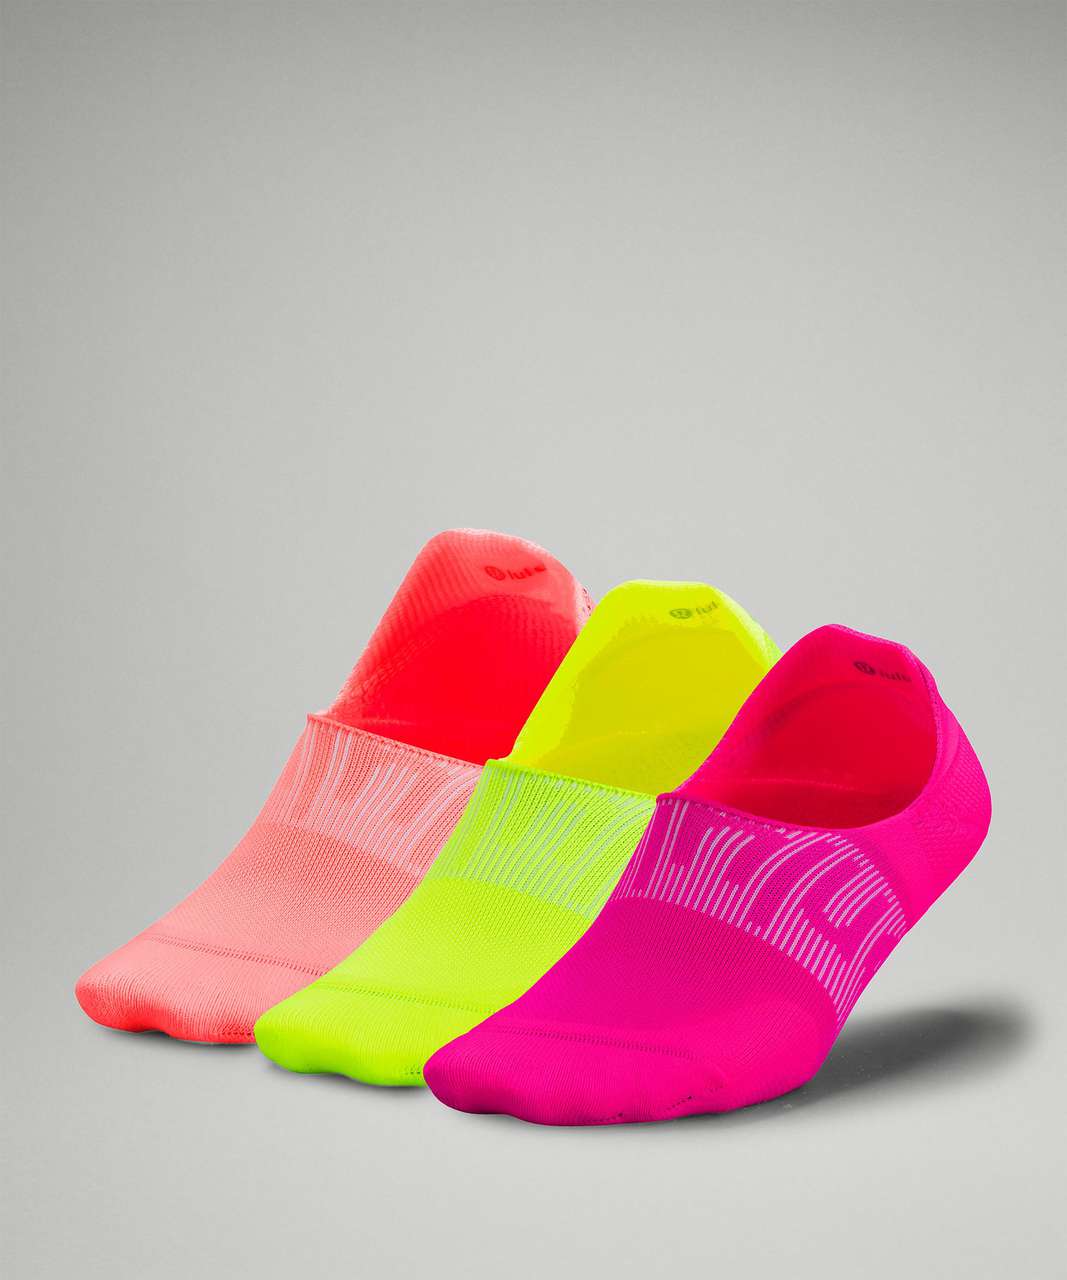 Lululemon Power Stride No-Show Sock with Active Grip 3 Pack - Highlight Pink / Highlight Yellow / Sunset